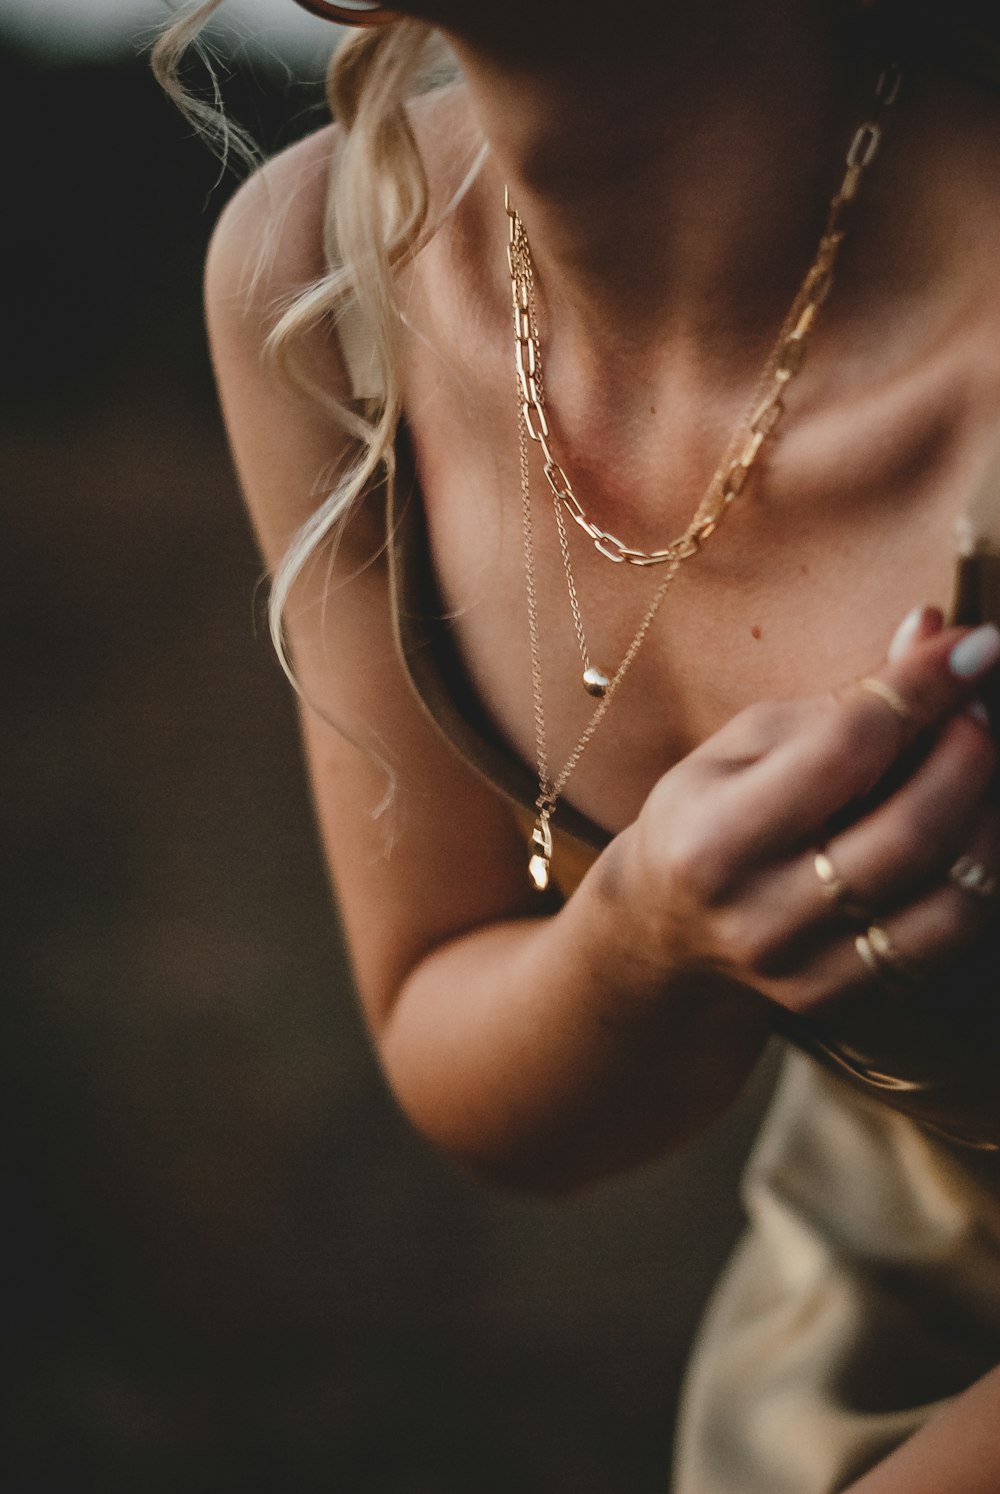 woman in white tank top wearing silver necklace